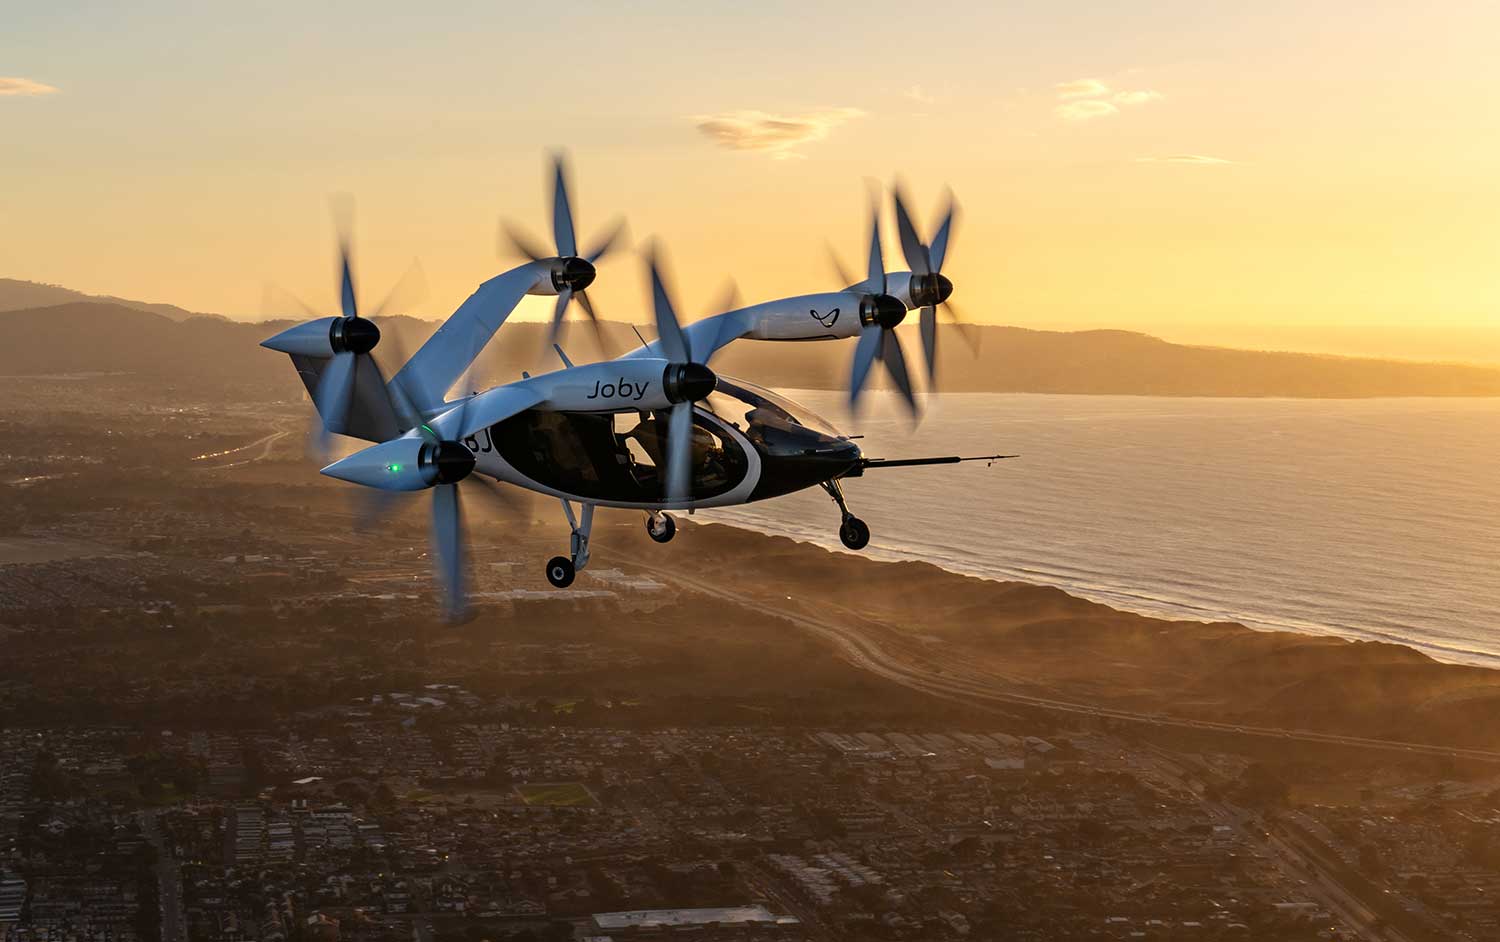 A vehicle with six vertical propellers in flight over a coastline.